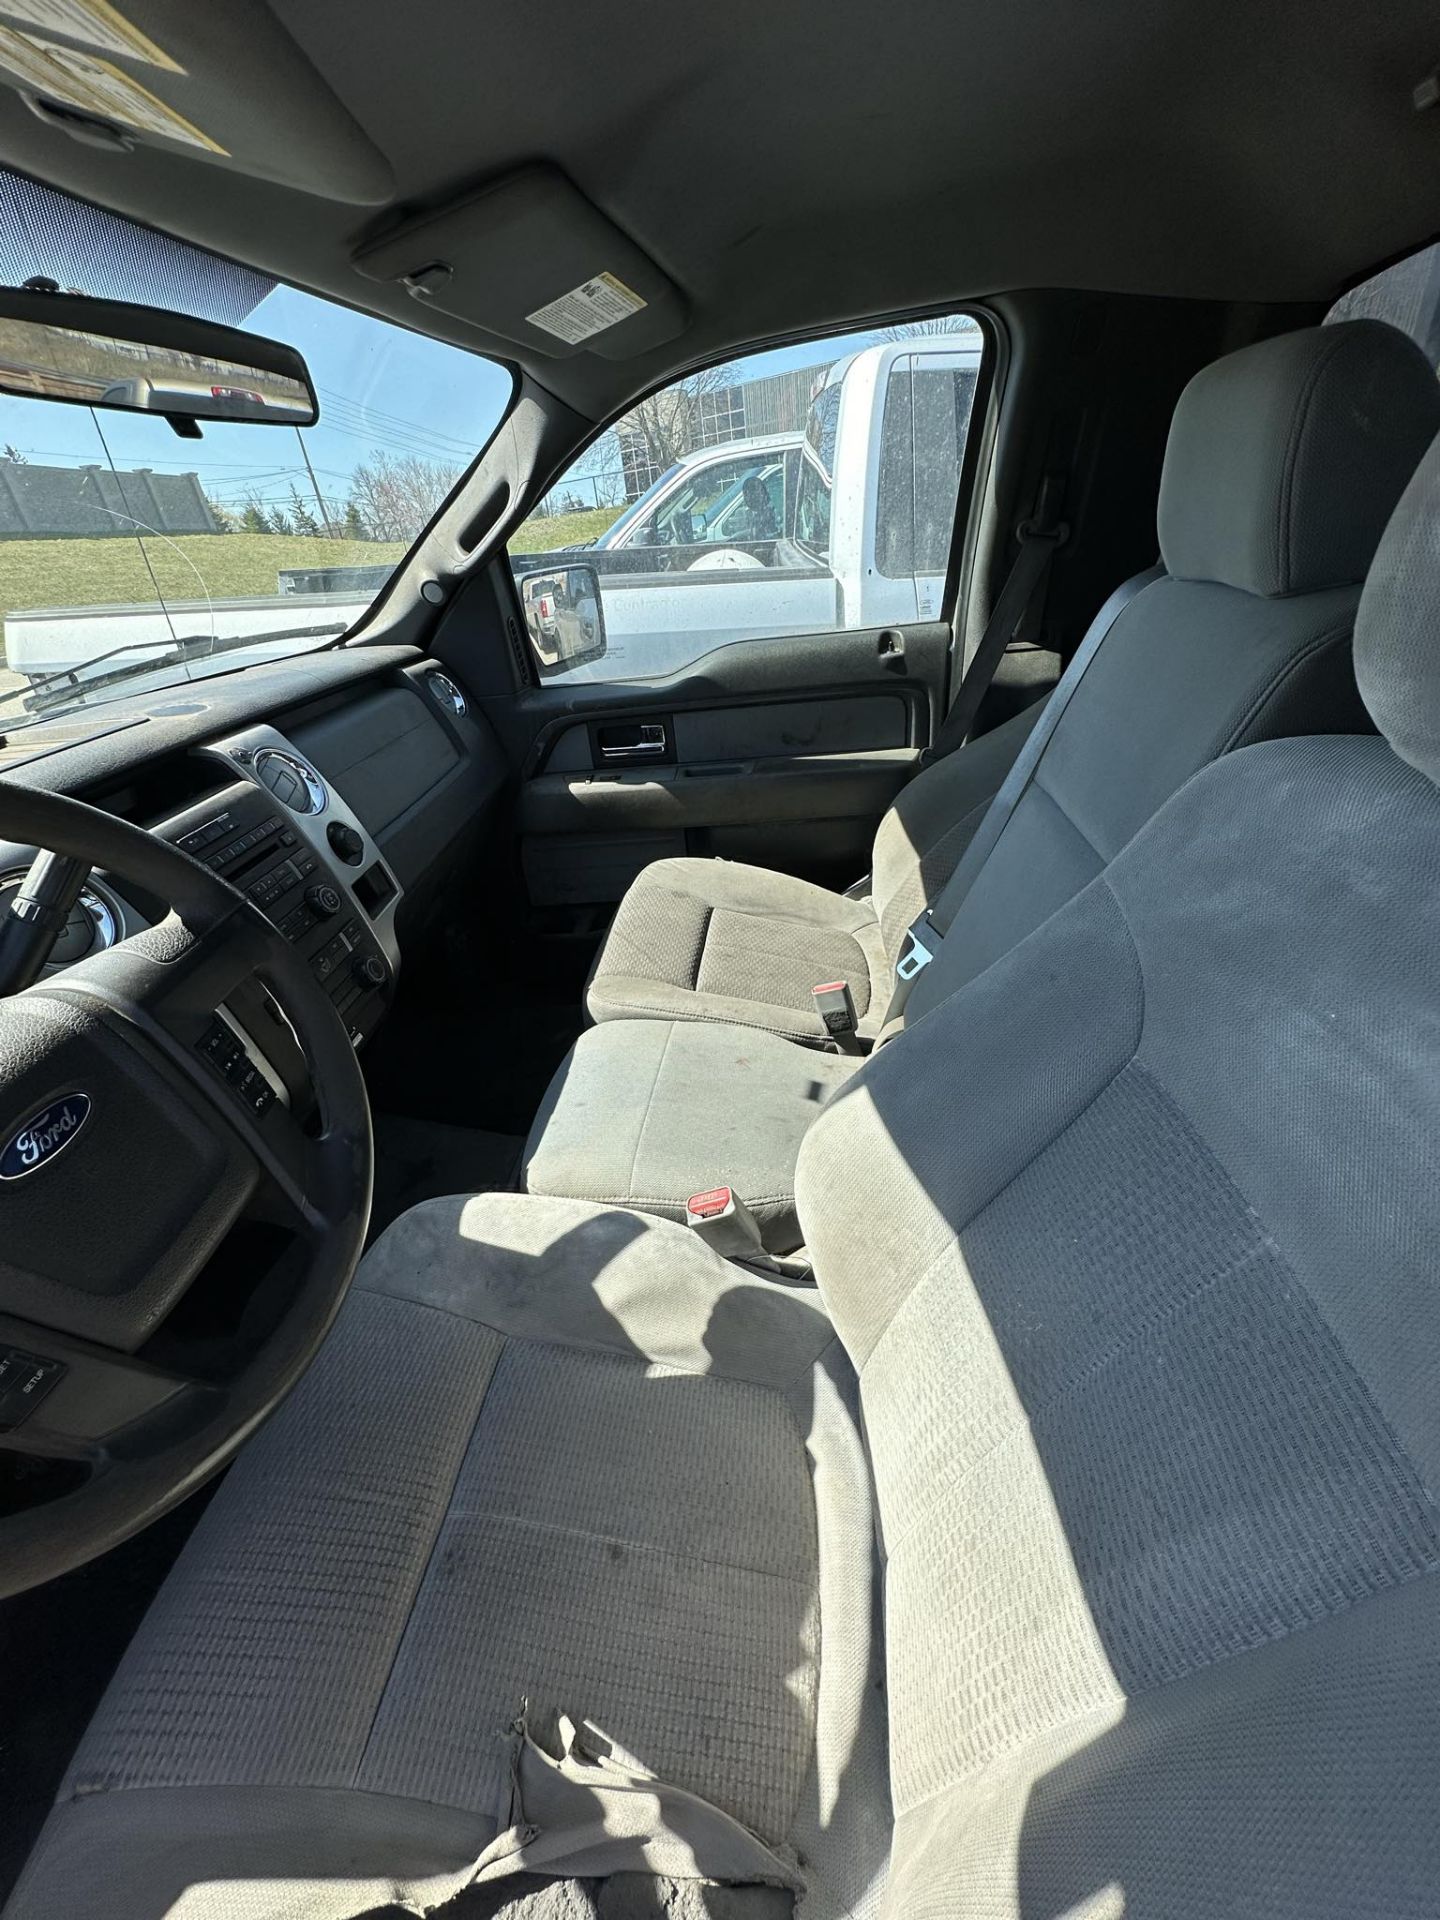 2014 FORD F150 PICKUP TRUCK, APPROX. 335,932KMS, VIN# 1FTMF1DE6EKD12846 (NO BLACK TOOLBOXES) - Image 9 of 9